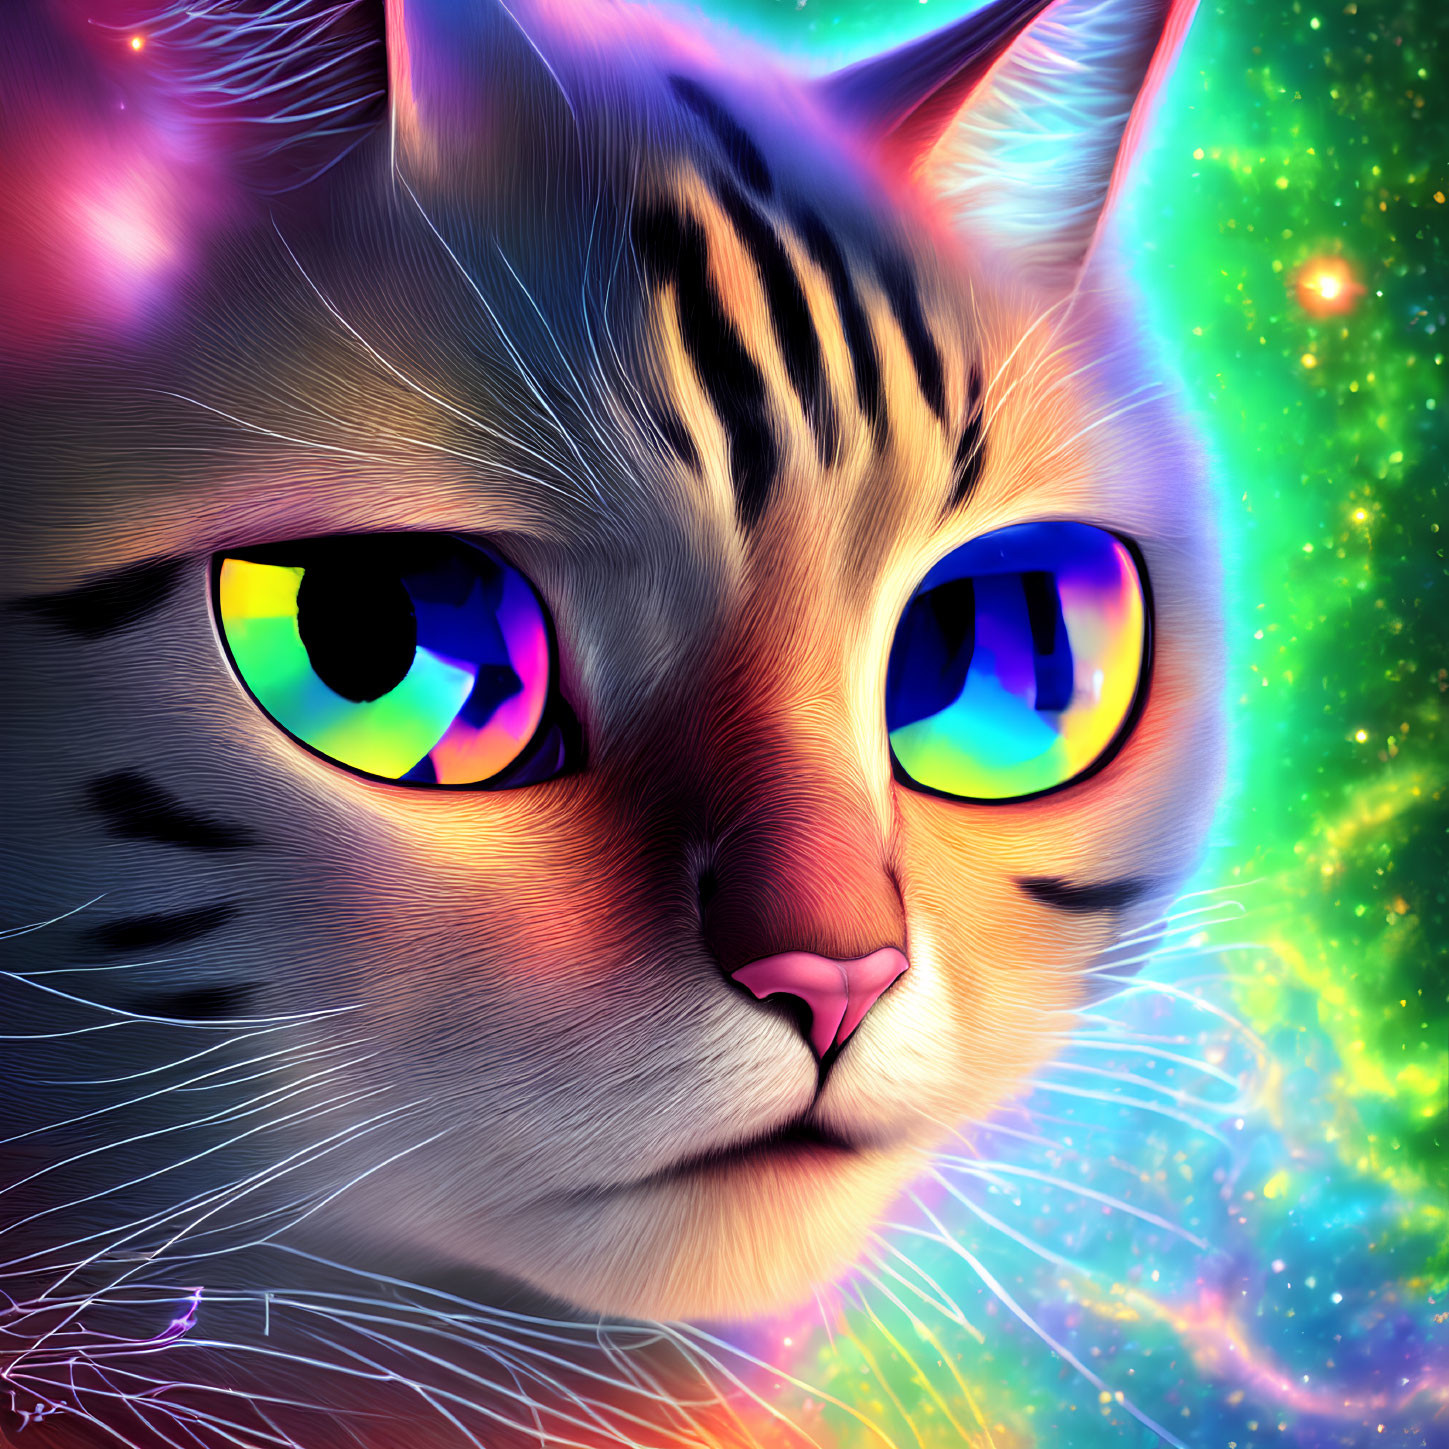 Colorful Cat Digital Art: Cosmic Background with Multicolored Eyes